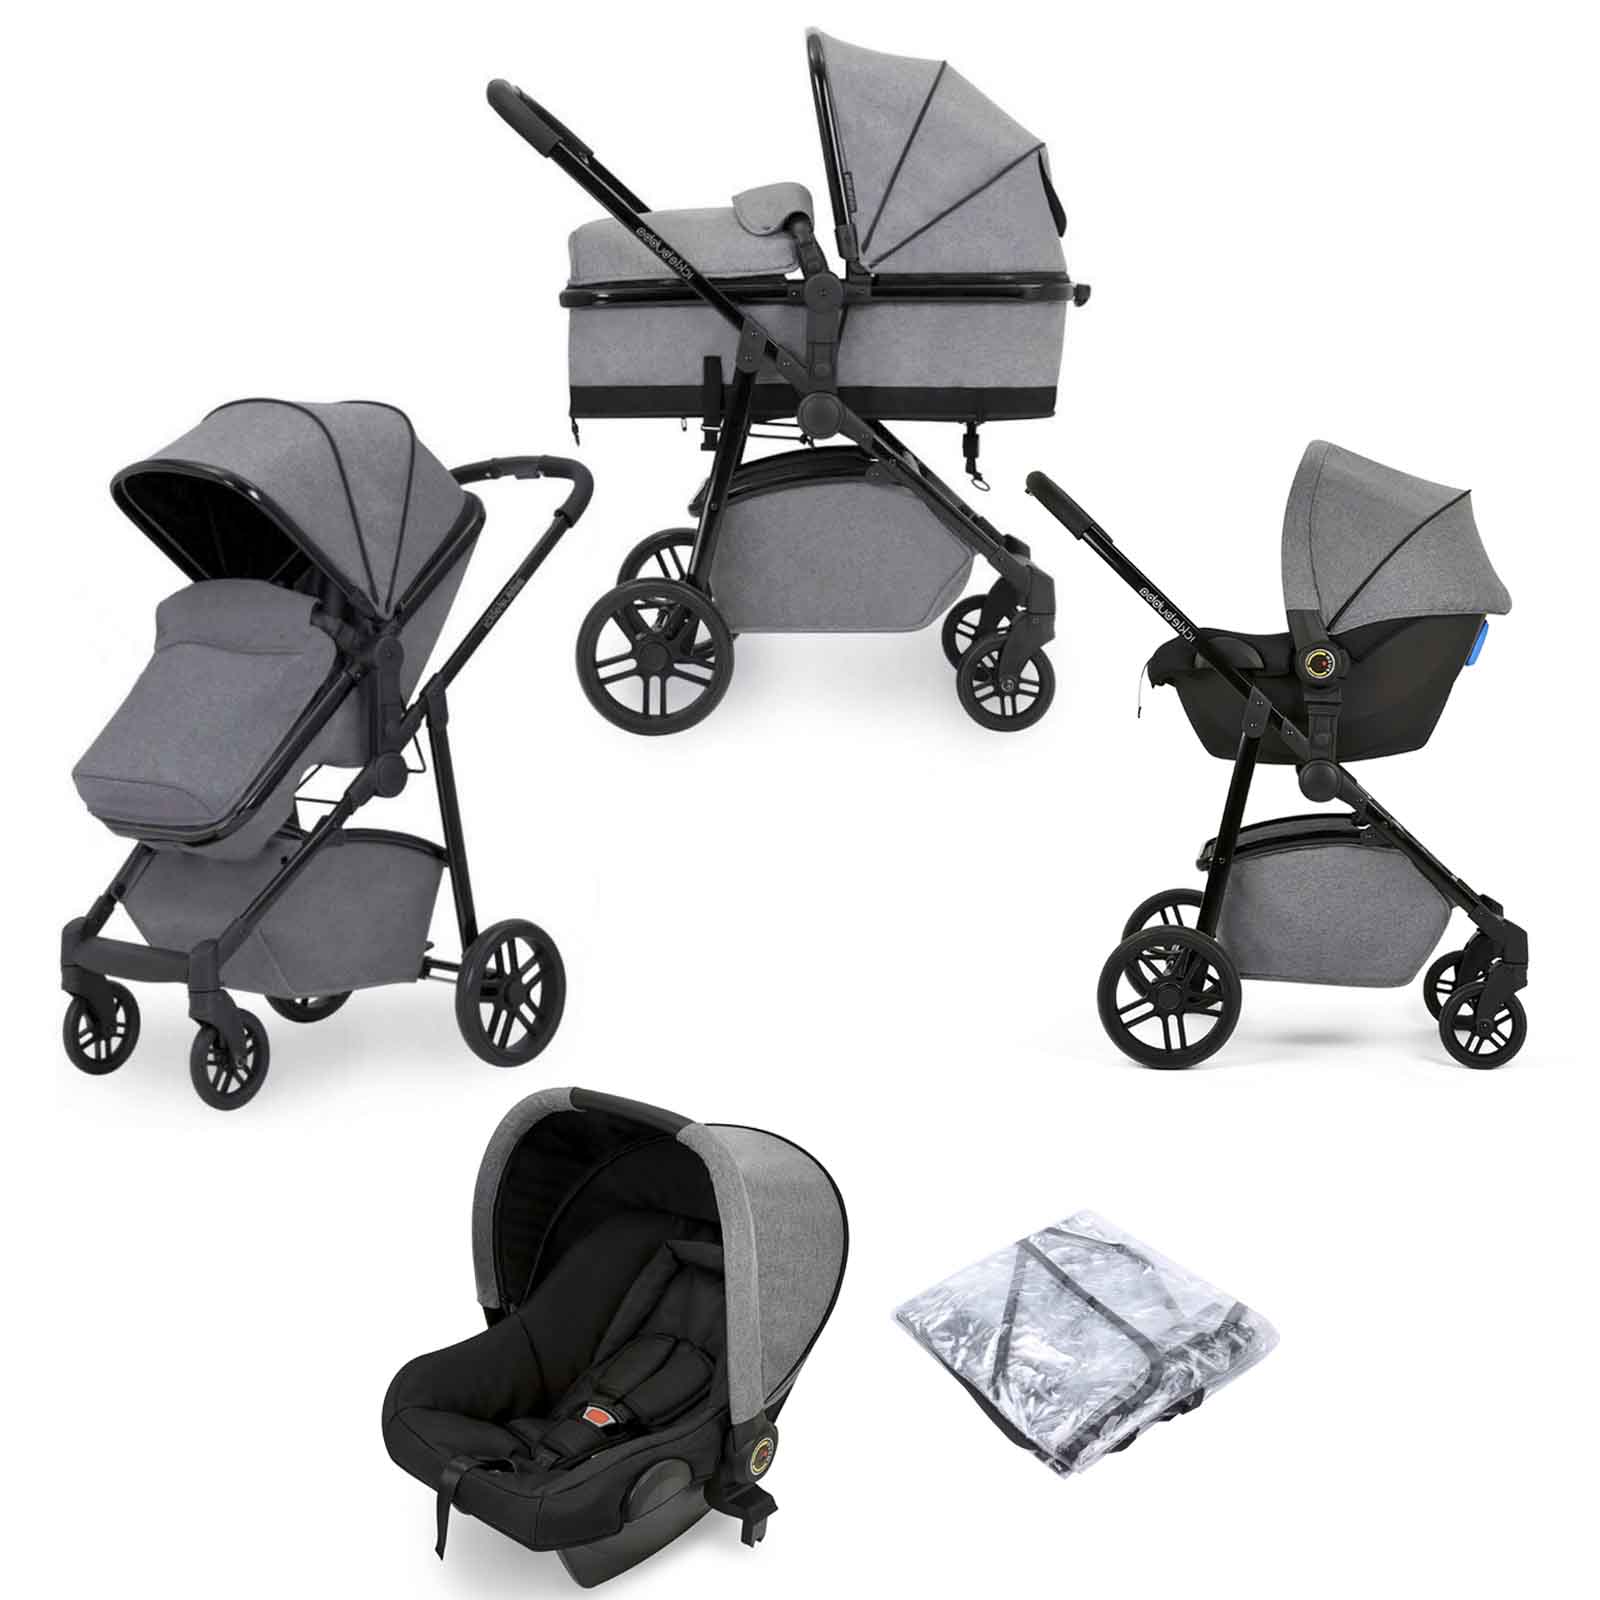 ickle bubba 3in1 travel system